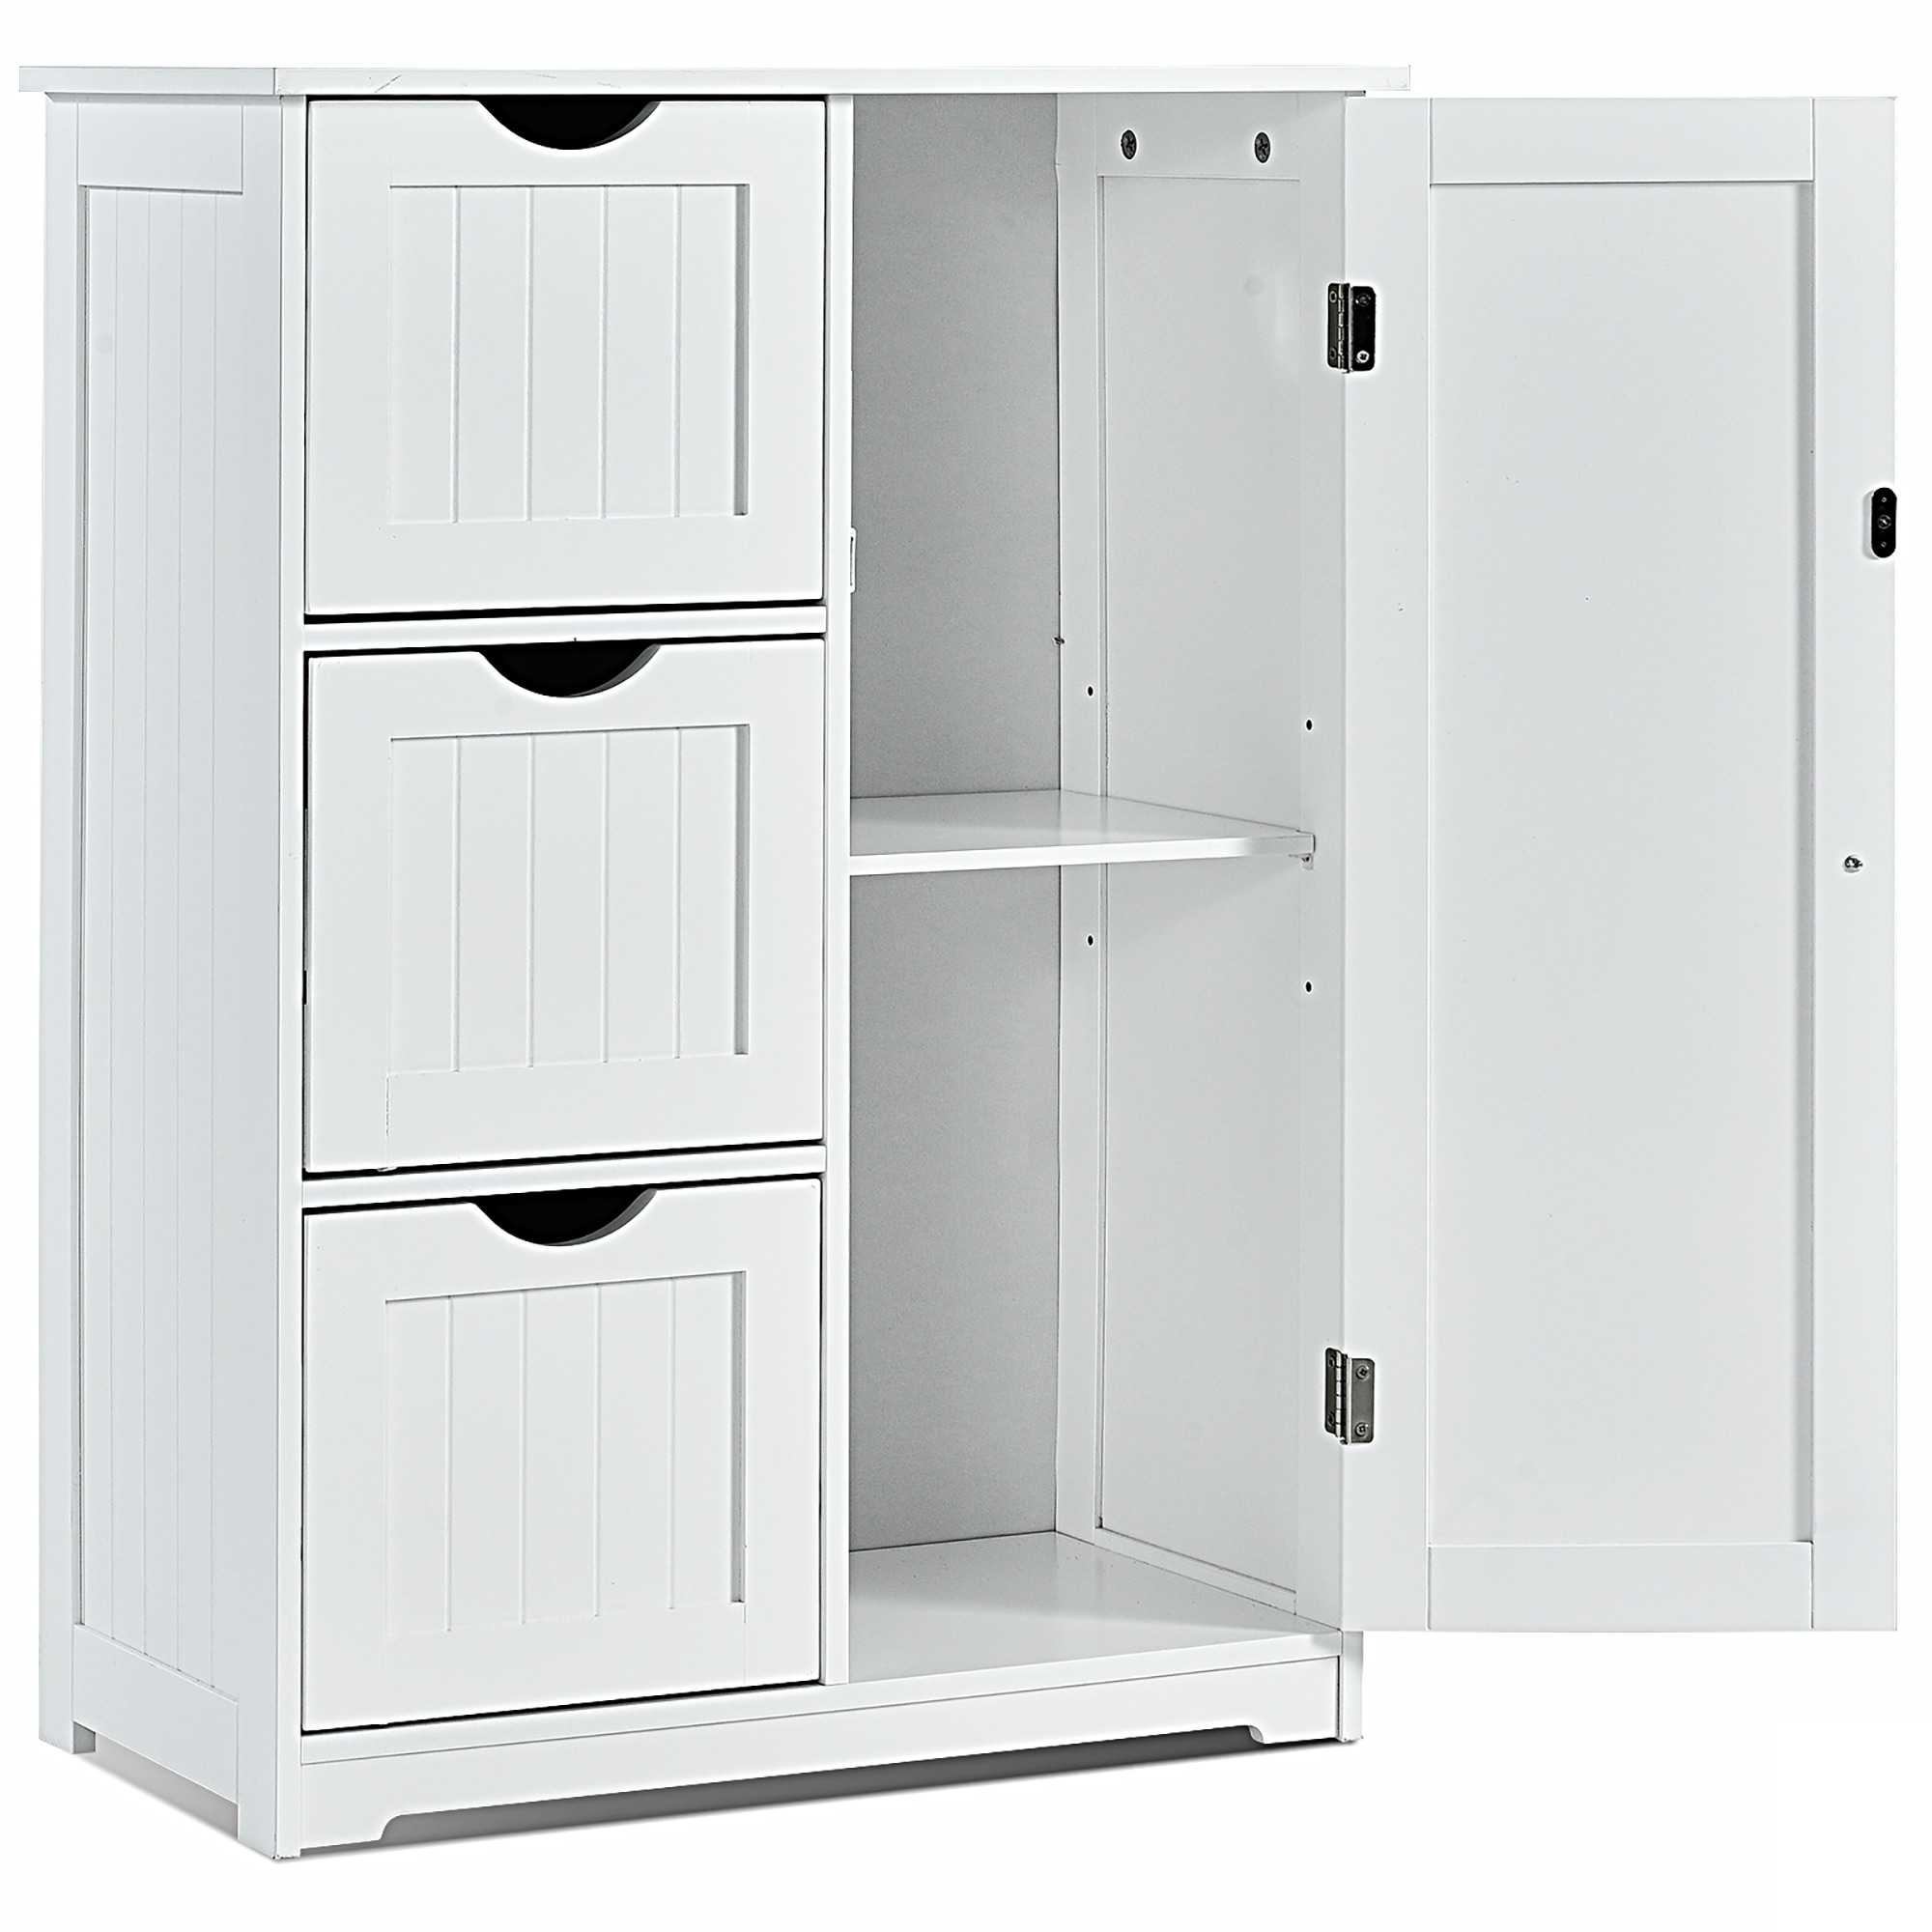 https://ak1.ostkcdn.com/images/products/is/images/direct/23ed842e782c405f8edaa57a0ee71a6b44aeb74e/Costway-Bathroom-Floor-Cabinet-Side-Storage-Cabinet-with-3-Drawers-and.jpg